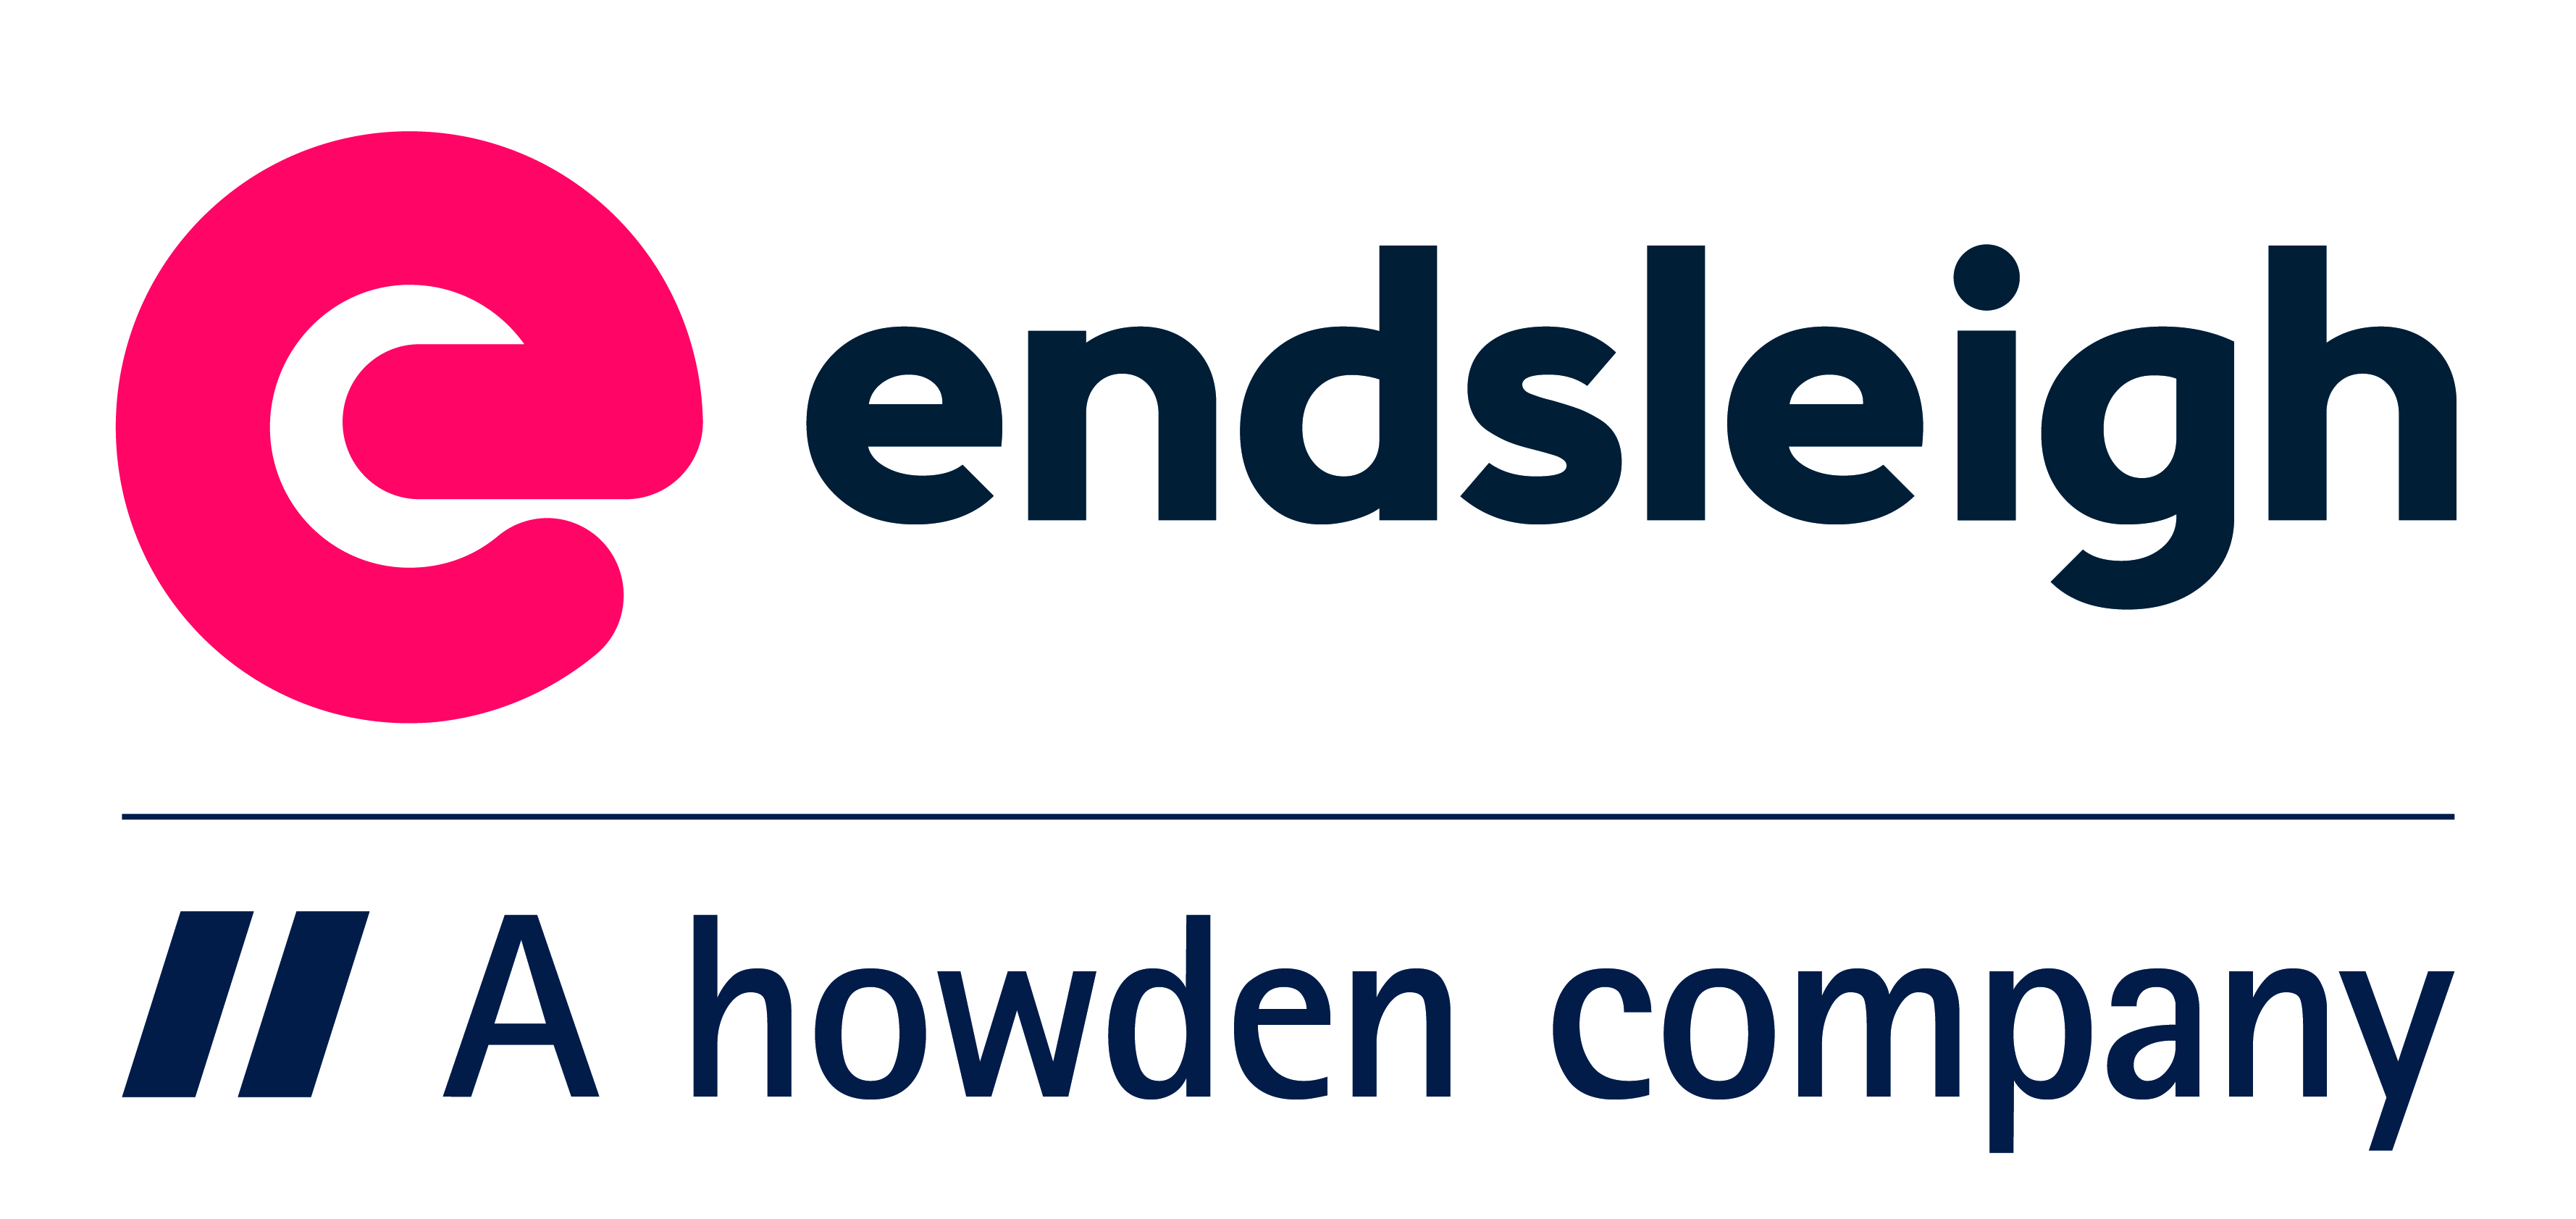 Endsleigh (opens in a new window)